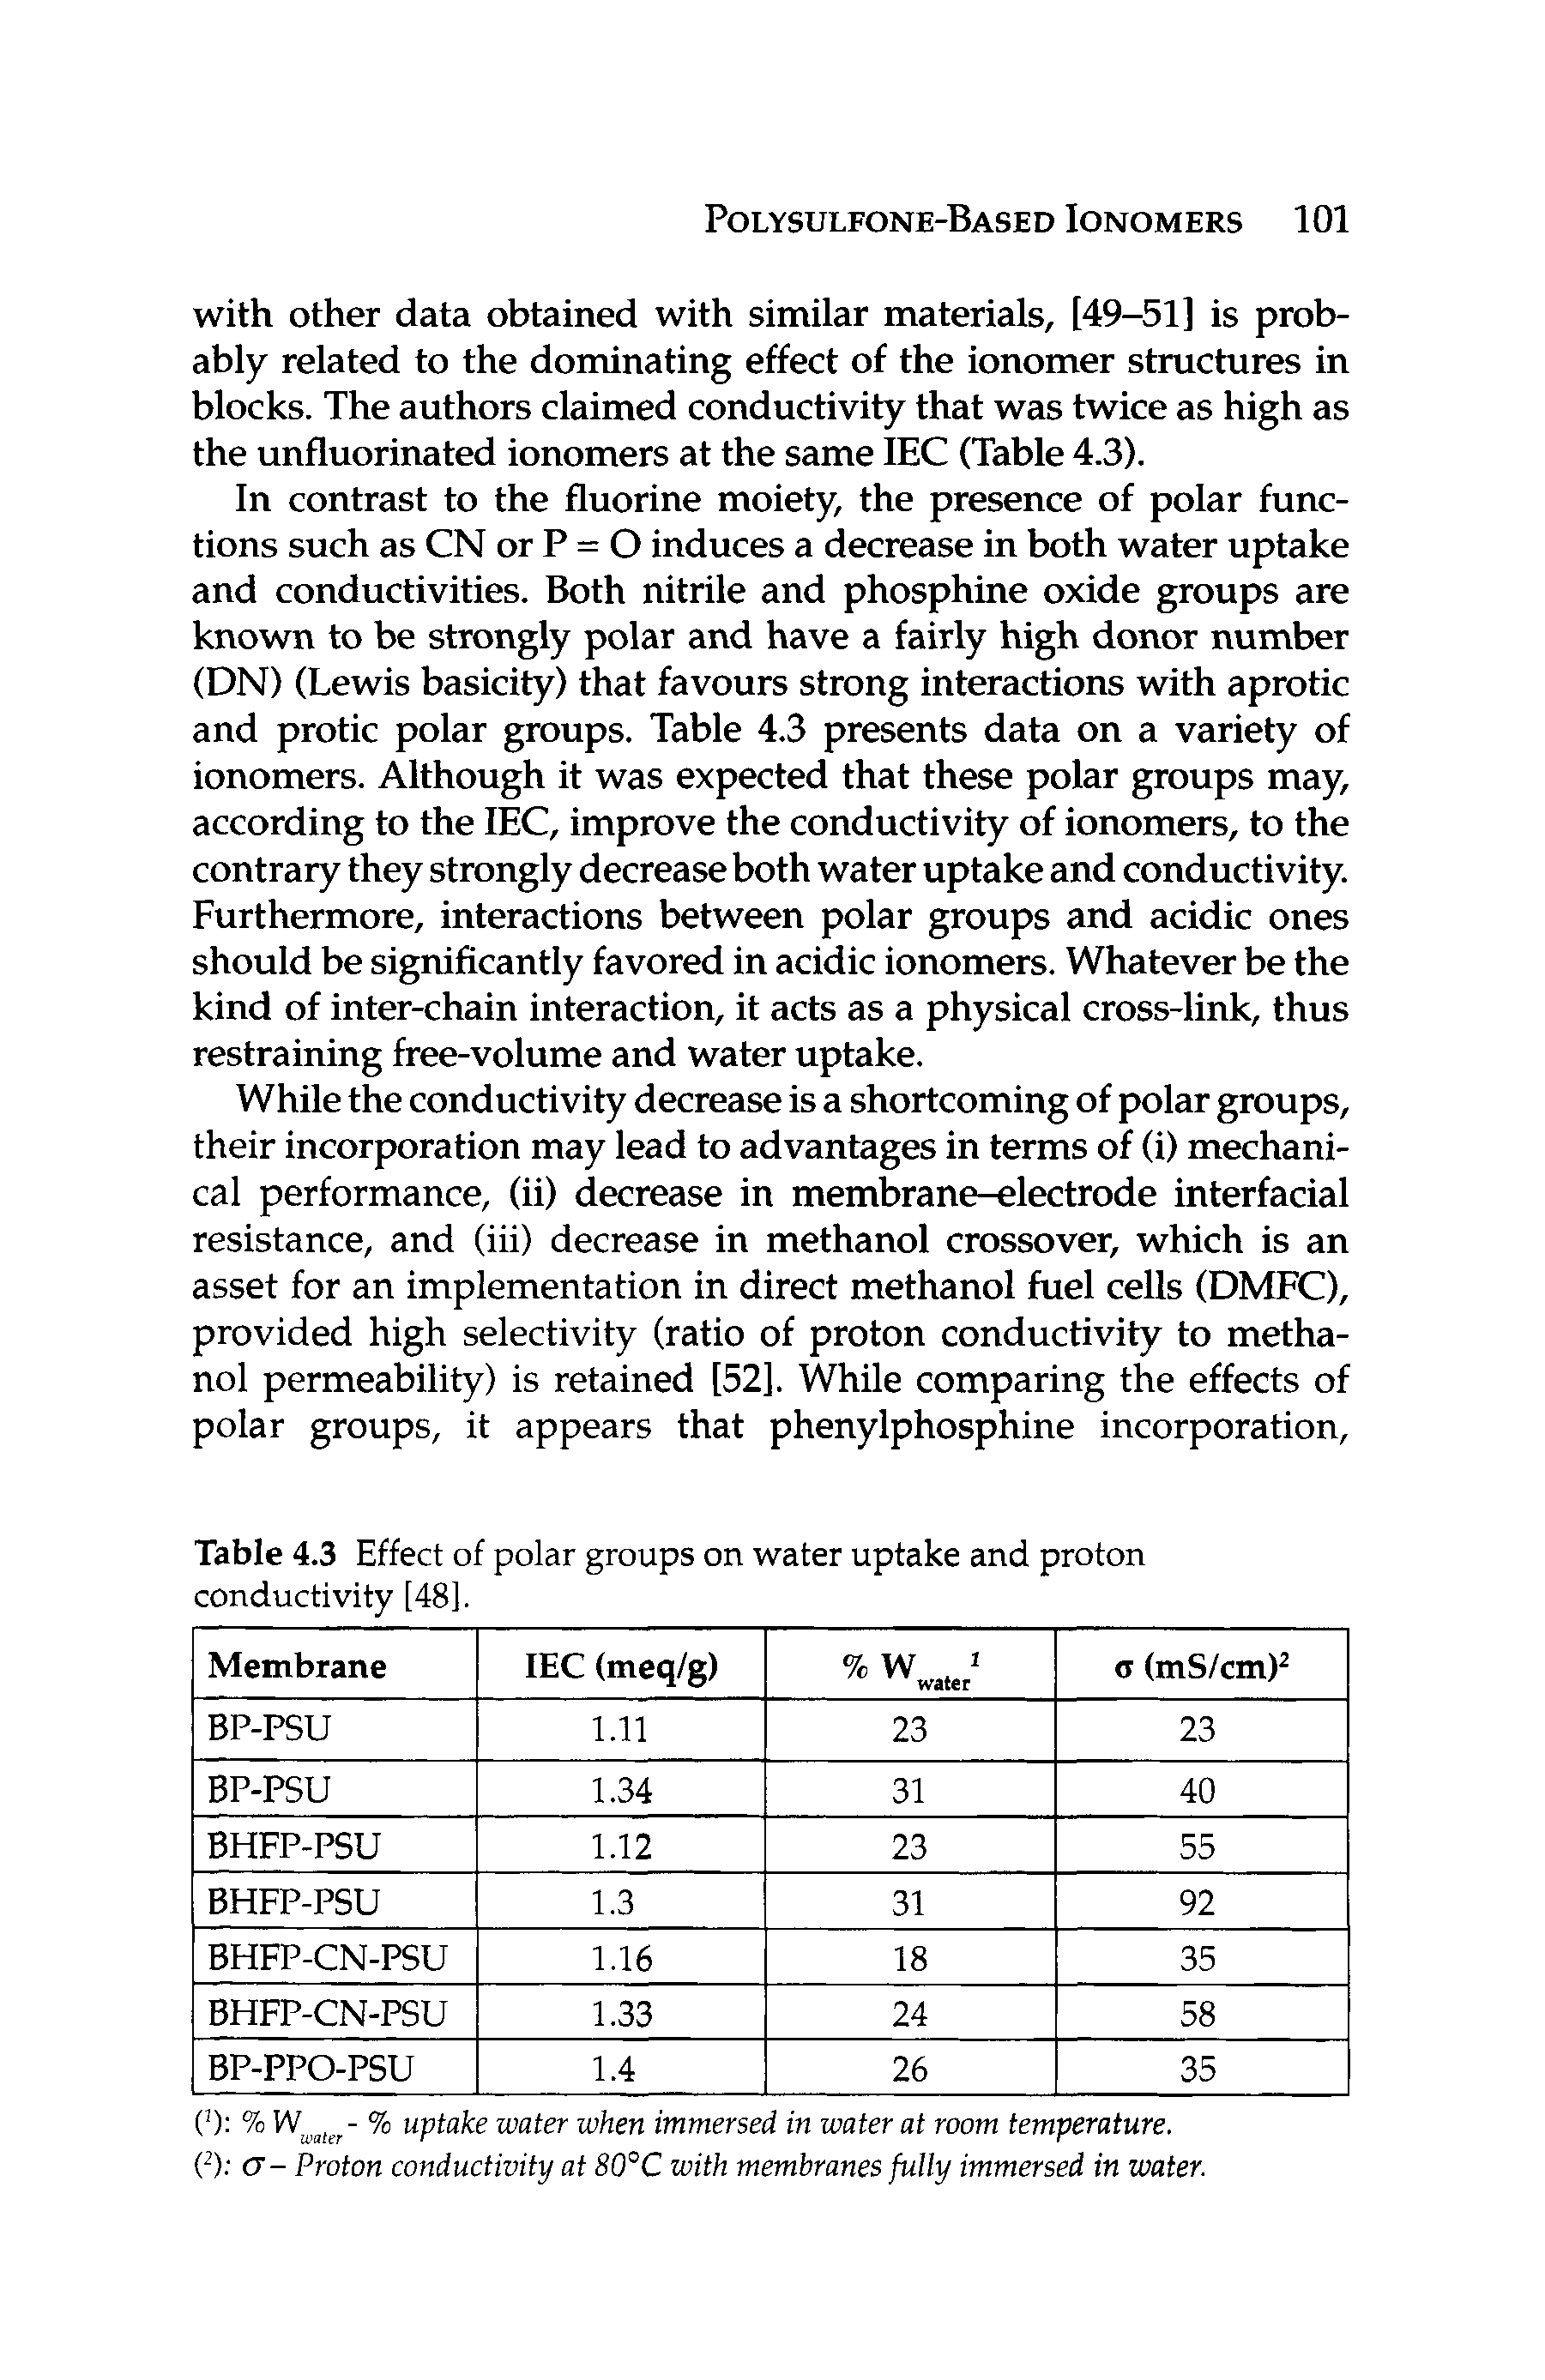 Table 4.3 Effect of polar groups on water uptake and proton conductivity [48].